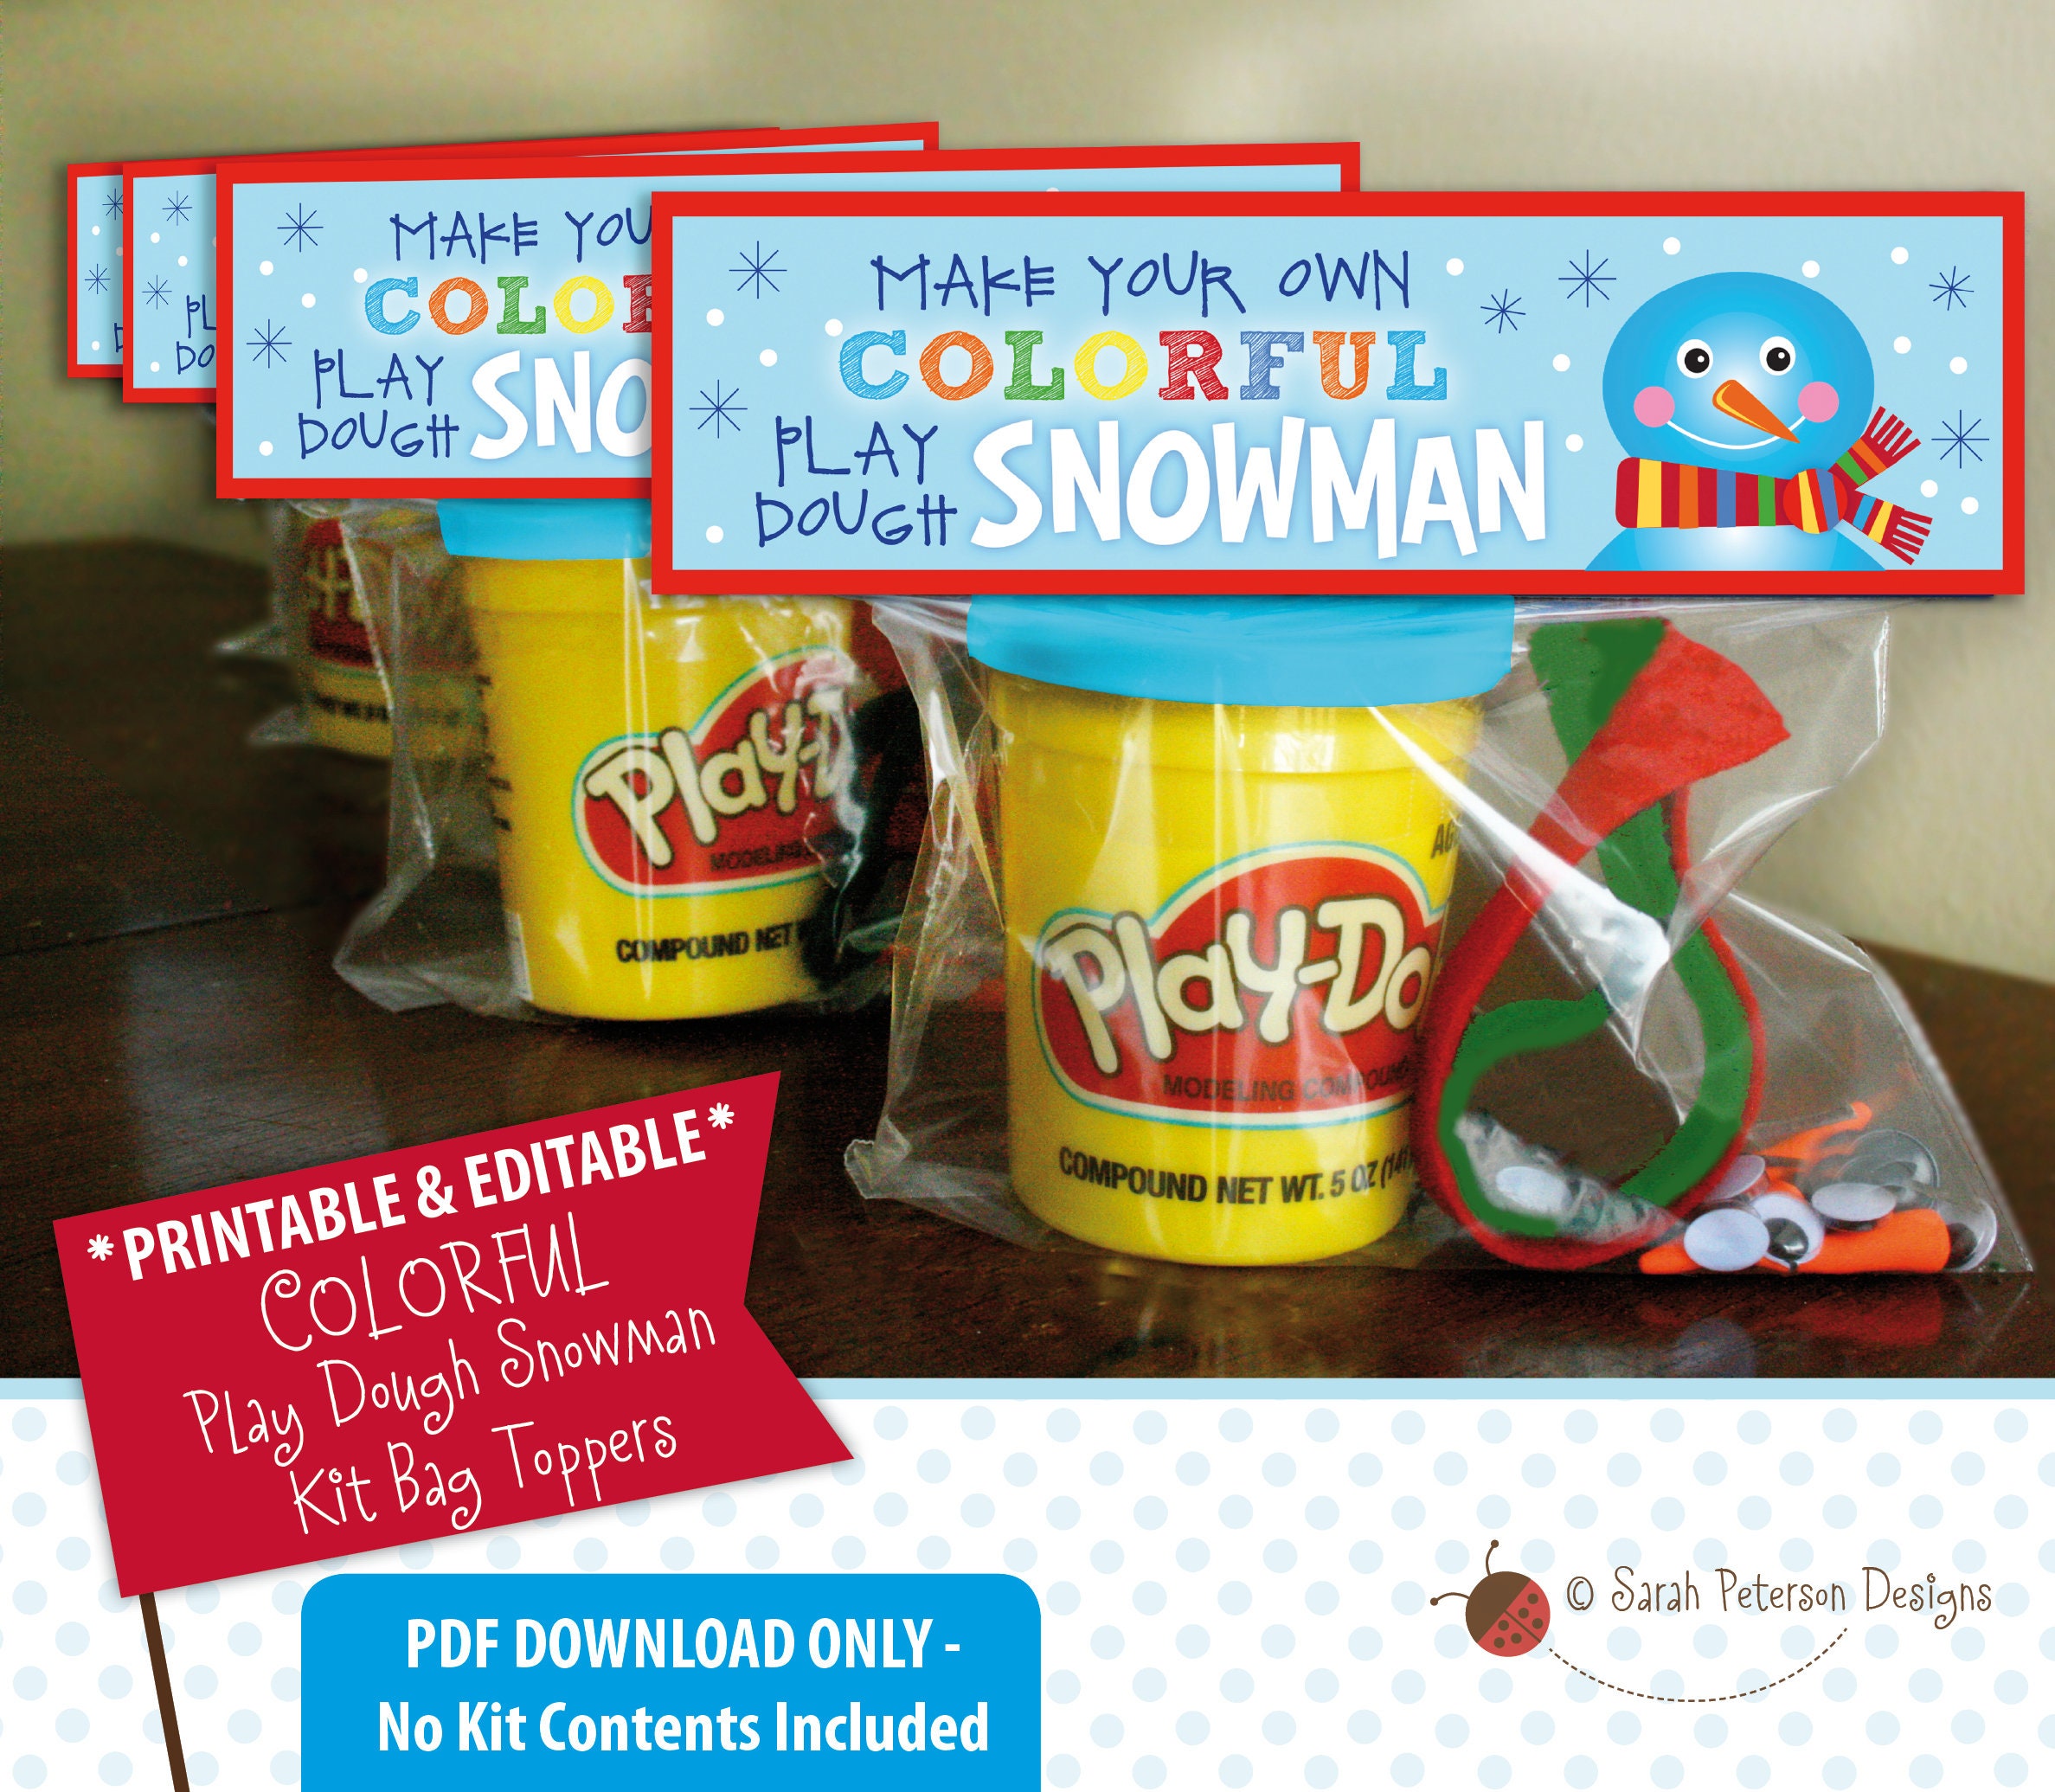 Printable Treat Topper for a Build Your Own Snowman Activity Kit – Kudzu  Monster